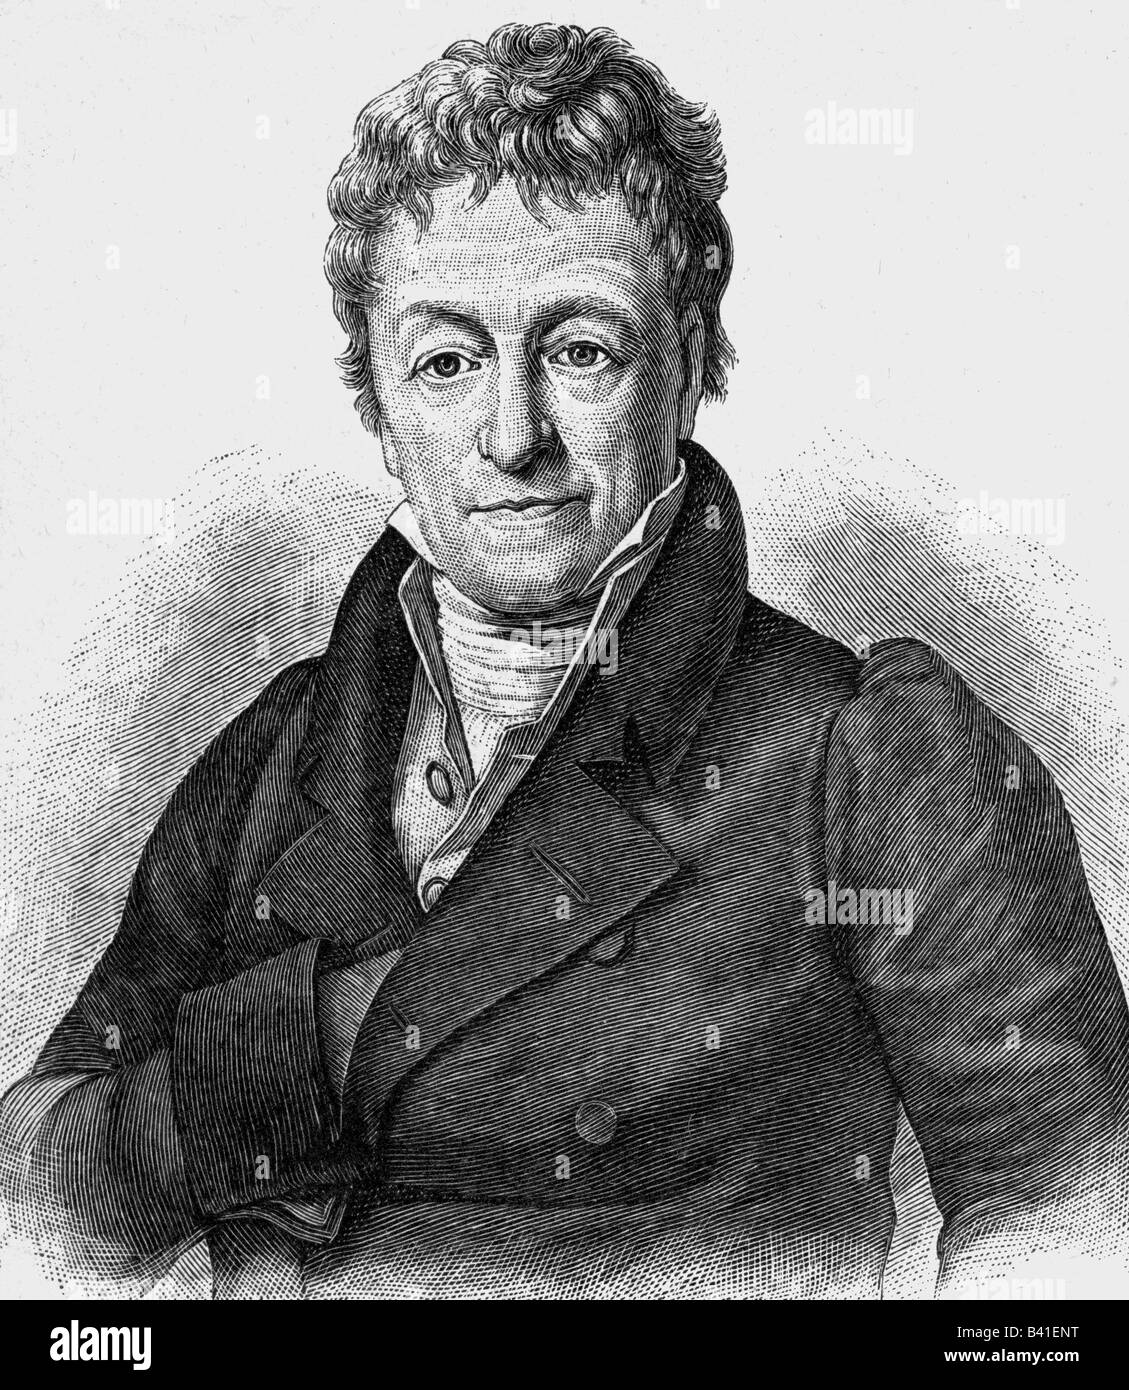 Carnot, Lazare Nicolas, 13.5.1753 - 3.8.1823, French politician, minister of war 1793 - 1795 and 1800 - 1801, half length, steel engraving, 19th century, , Stock Photo